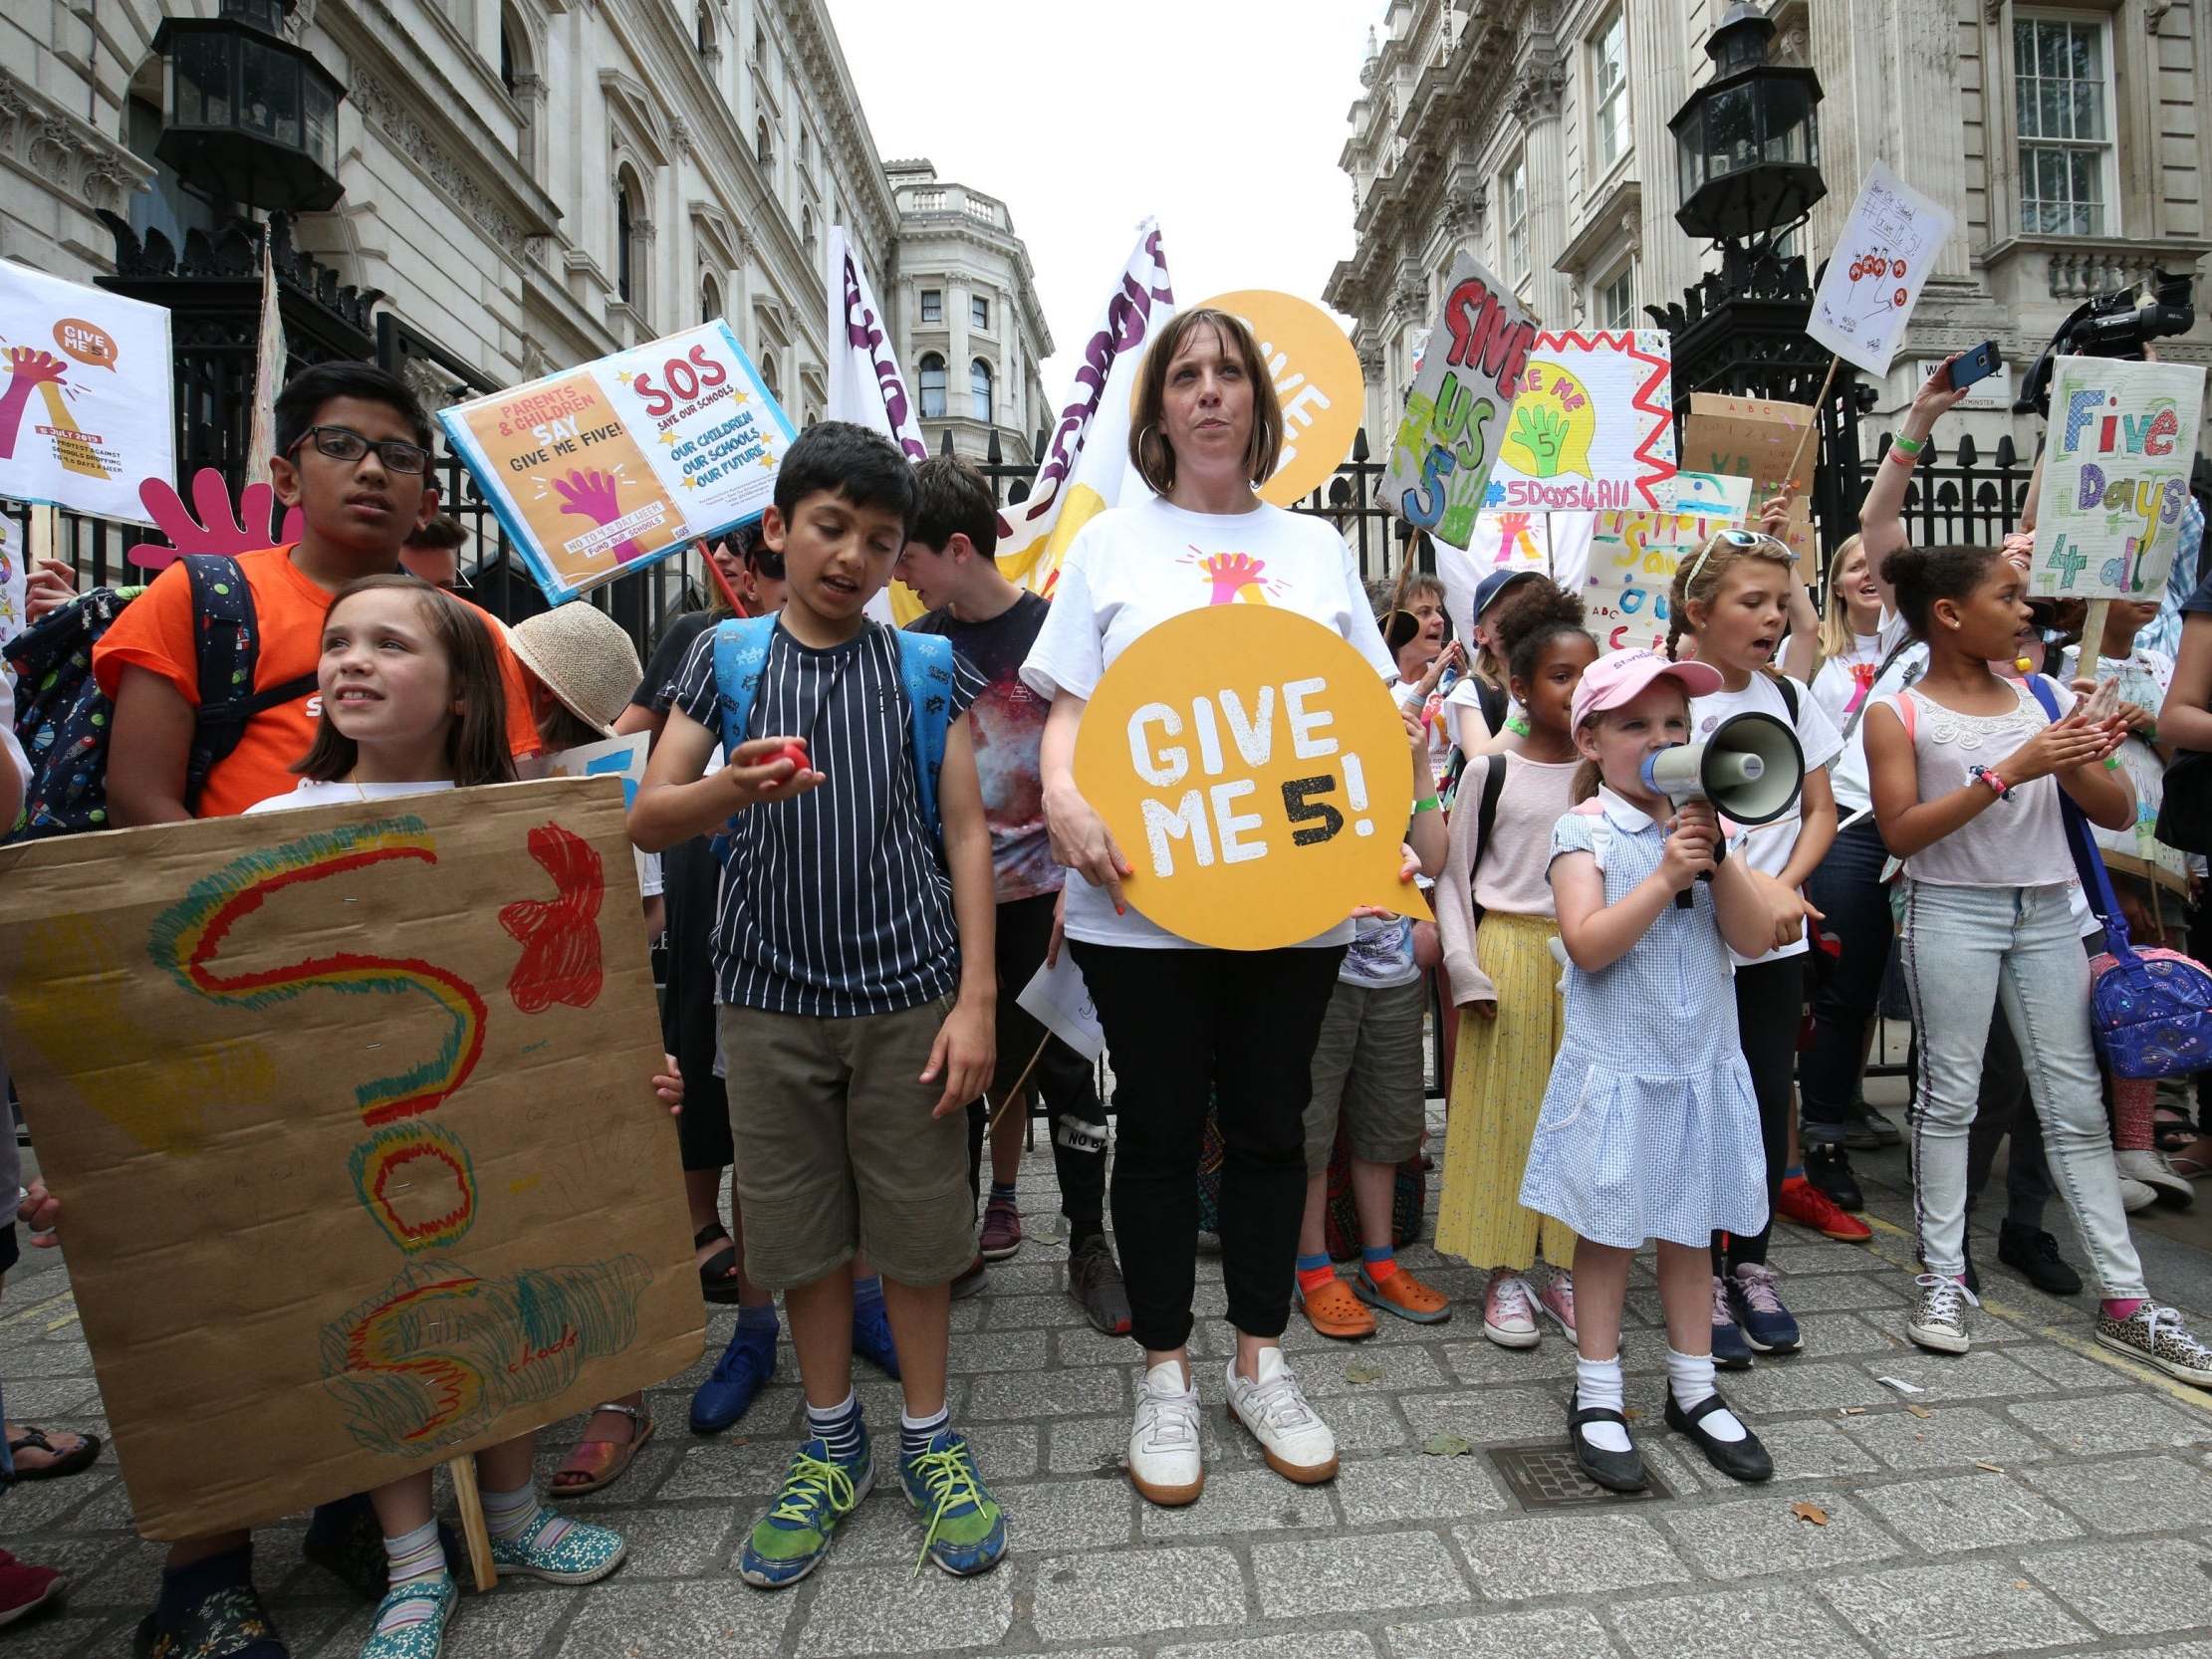 Labour MP Jess Phillips joins a protest against schools being forced to close early